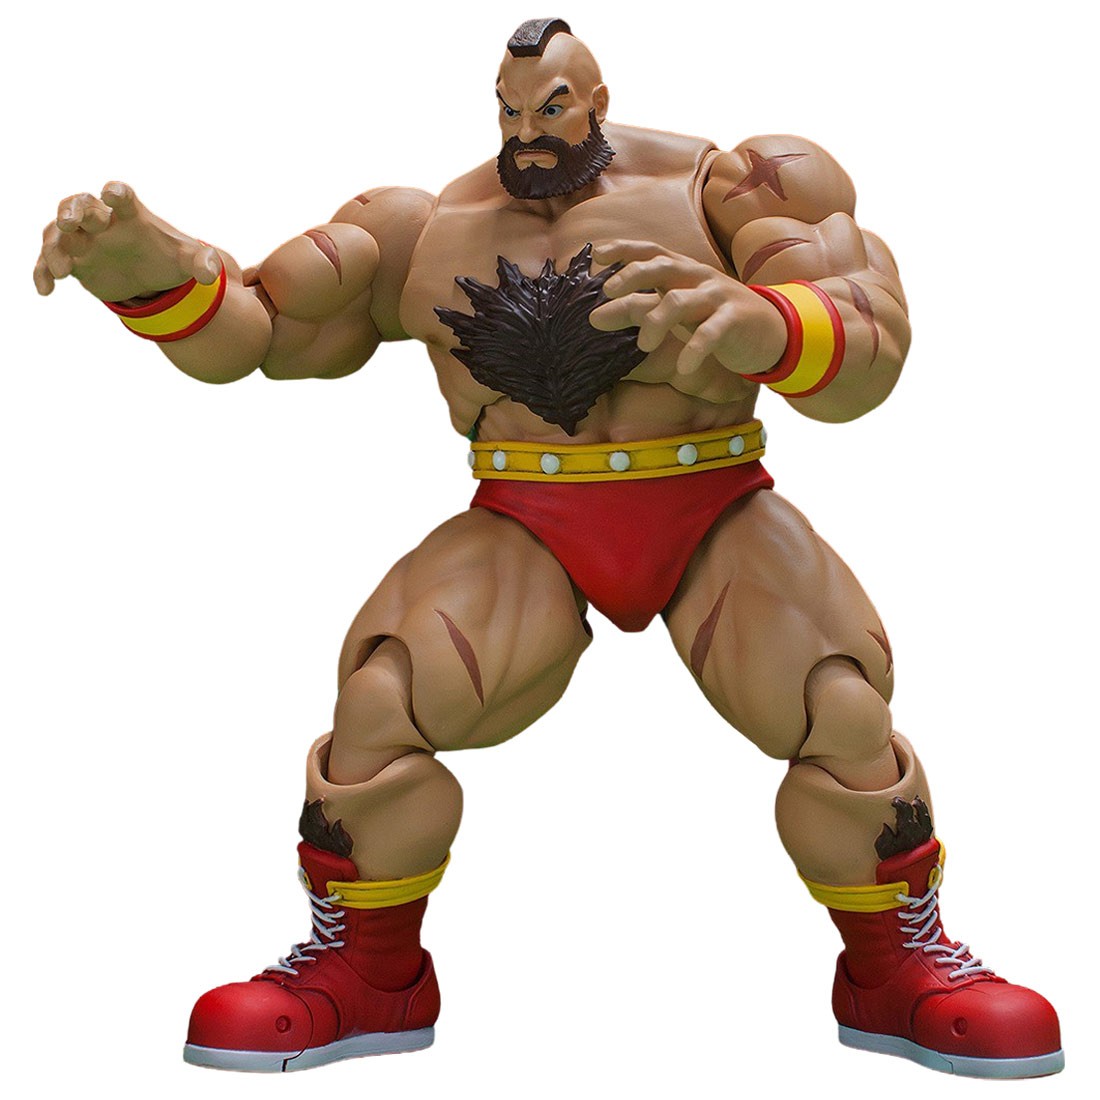 Storm Collectibles Ultimate Street Fighter II The Final Challenger Zangief  Action Figure tan